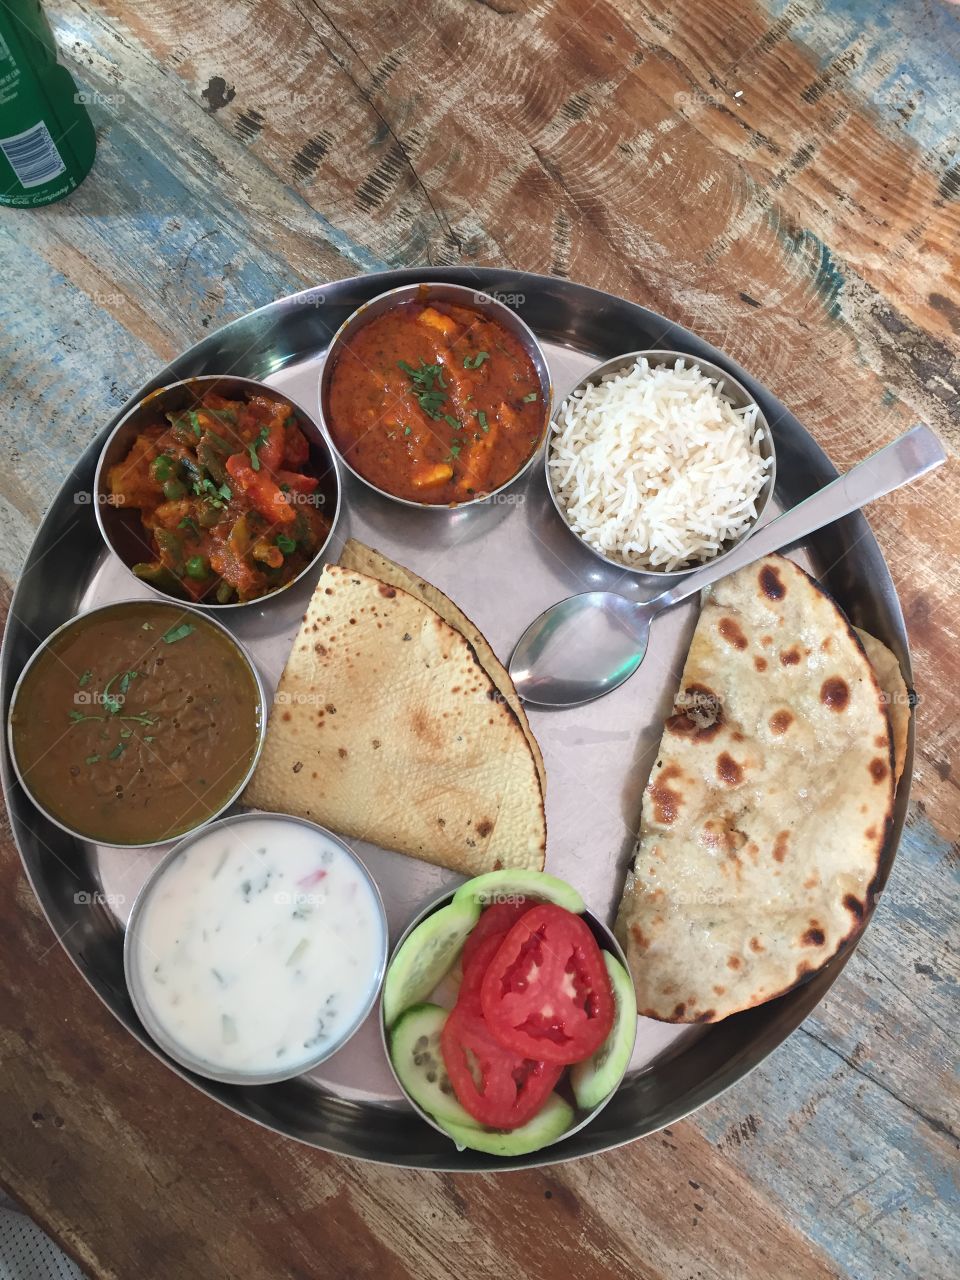 Thali in india. The best way to sample different curries and breads. This one was in Varanasi 